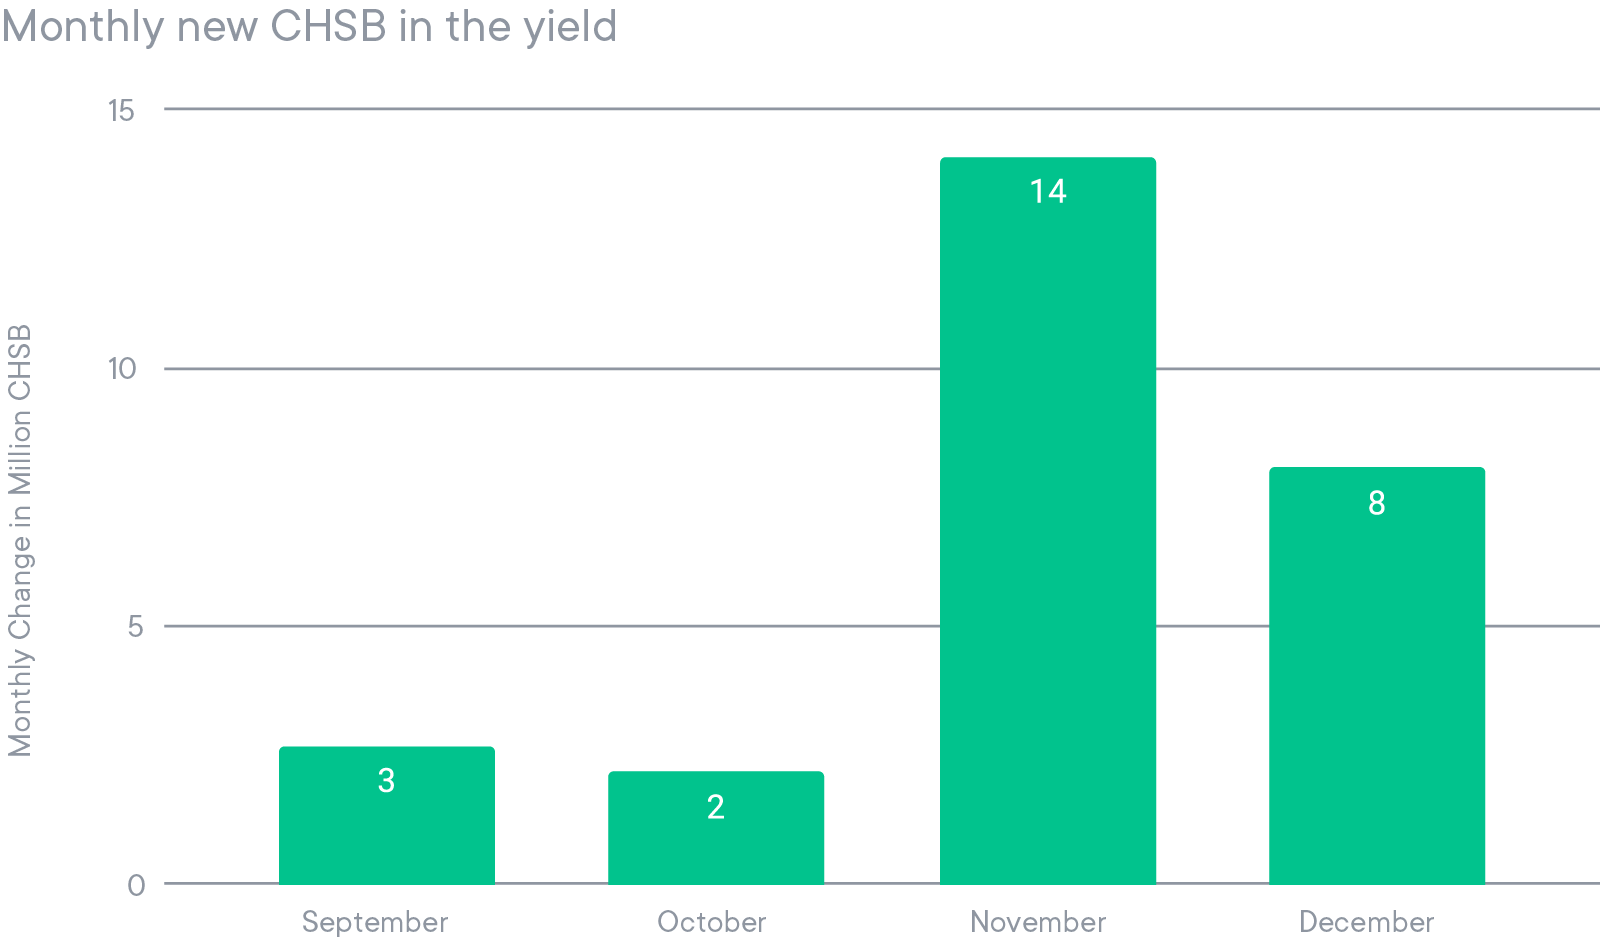 Monthly new CHSB in the Yield